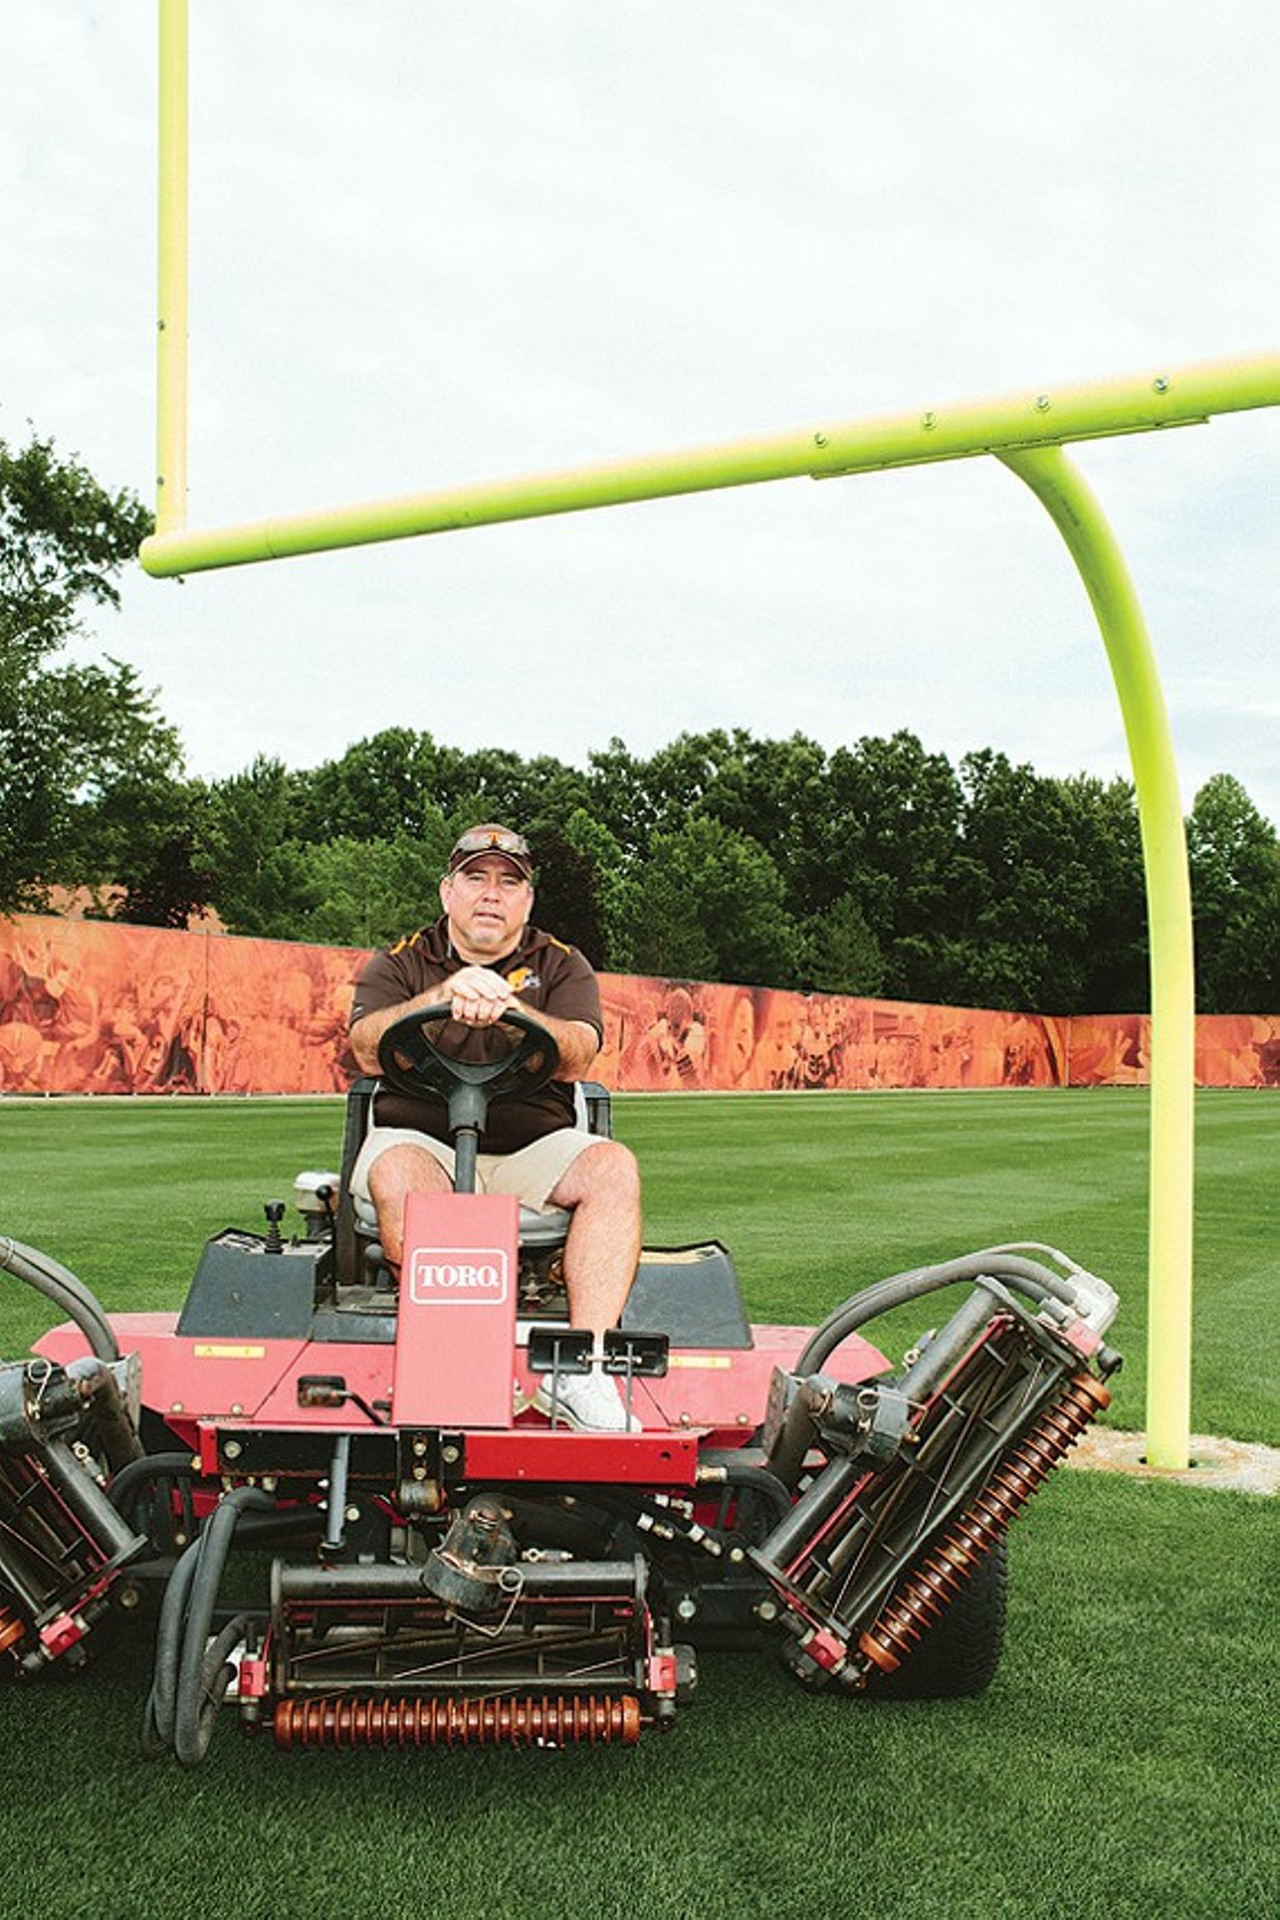 The Grass Man: Chris PowellHead Groundskeeper, Cleveland Browns
There's a saying amongst groundskeepers to this effect: If nobody is saying anything, everything is great.
Hundreds of thousands of people tune into Browns' games each fall and winter, and while they watch whatever quarterback has been left holding the hot potato at the time, they are also watching Chris Powell's handiwork. But they're not talking about it.
Powell, 47, is the head groundskeeper for the Cleveland Browns and has been since 1999. That means he's the man in charge of the turf down at the stadium as well as all the turf at the team's practice facilities in Berea.
"At both locations, I basically designed the fields myself," he says. "At first, they didn't let me design the field for the stadium &#151; there was also a time crunch &#151; up to my specs. Basically, for the NFL, you take the United States Golf Association's specifications for golf greens and that's what you work with. It's pretty much sand, with a little peat. I also added 10 percent clay to the mix to help with stability at the practice facility. We didn't do that at the stadium and there were issues from the first game. There was no stability. It's thin-cut sod, and it was late June, and it was a very hot summer in 1999. We had some issues with rooting and had to resod and redo it for the next season."
Since then, however, you haven't heard so much as a peep about the playing field not being up to par. And Powell says they haven't had to do a full resod of the complete surface in seven years, though the middle of the field, prone to the most wear and tear from 300-pound bodies, does get fresh turf throughout the year.
What does it all entail? Traveling with the team and making sure any surface they set foot on has the right hardness standards, checking the weather more than a meteorologist, organizing plans for any special events that'll be hosted at the stadium and thus affect his precious sod, and dealing with fickle kickers.
"Phil Dawson's a great guy," says Powell of the departed Browns kicker. "I don't want to say we had a love-hate relationship, but ... . He had very good success in Cleveland. We had lots of conversations through the years. He'd want to know how much sand was at the top of the soil, how that changed what cleats he might wear, he'd ask about the top dressing of the field &#151; he was very in tune to everything we did."
Back when he got out of high school, Powell's dad told him to get a job for the summer. So he got the best job he could find: working at a golf course. He saved up, went to the National Guard, went to Central Missouri State and got to work on athletic fields and golf courses and network. Which is how he got hooked up with the Browns' groundskeeper back in 1992. He was in Cleveland for a year before heading to Kansas City to work with groundskeeper guru George Toma, a legend in his line of work who has been the groundskeeper or assisted with groundskeeping at every single Super Bowl since the first one in 1967.
"I learned the high intellectual end of groundskeeping from some of the people I've worked with and the old-school stuff from George Toma," Powell says. "I like to think I've come to a sort of balance." 
By: Vince Grzegorek